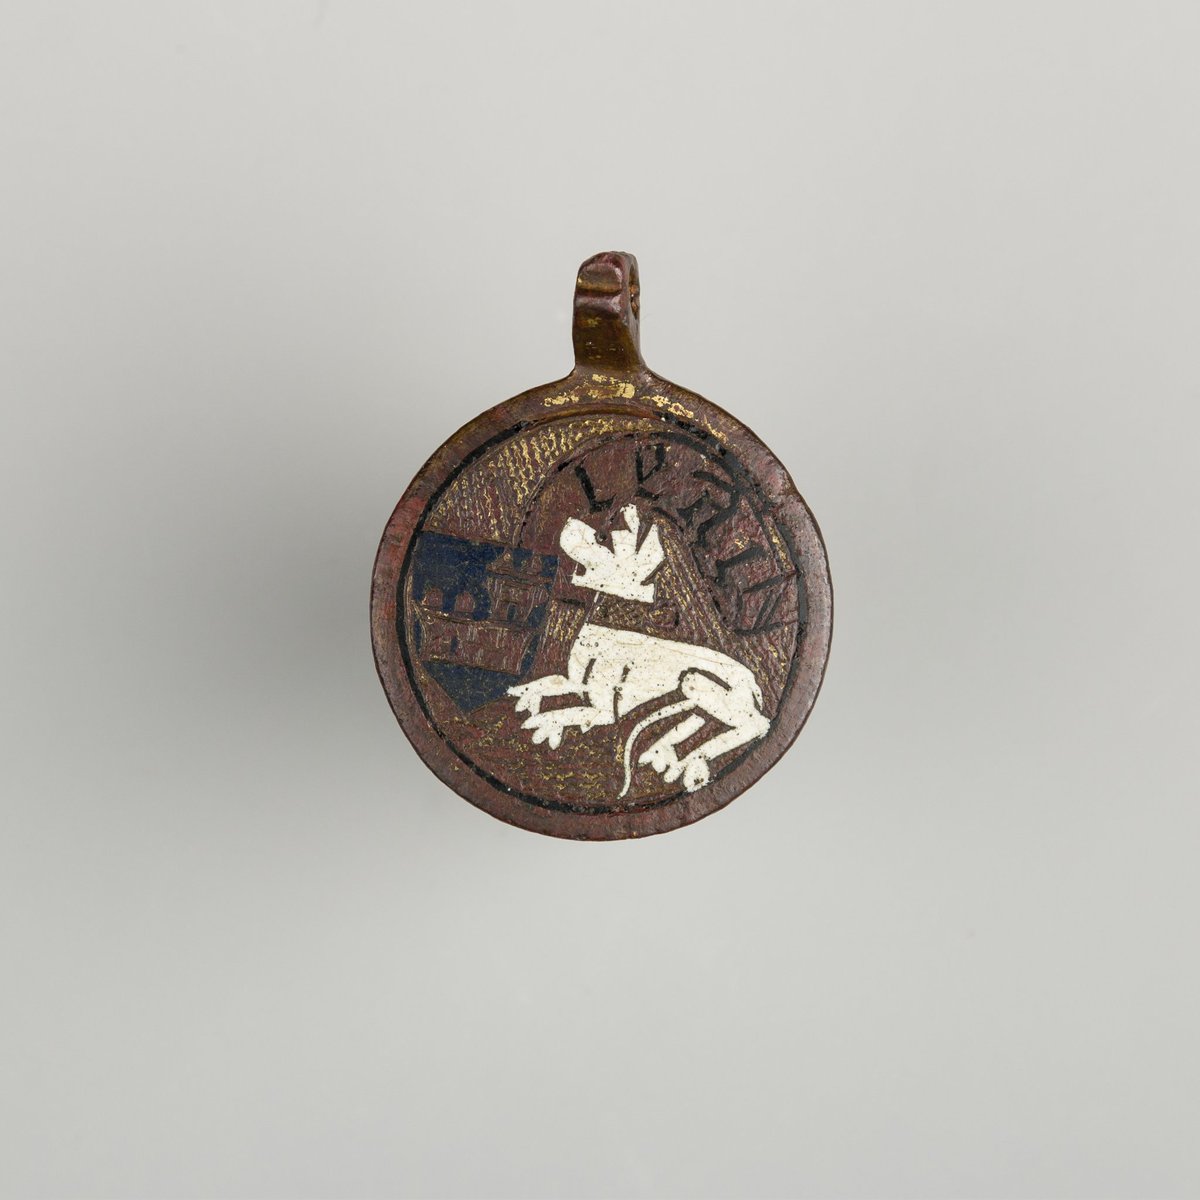 This sweet little fellow once decorated a saddle, crupper, bridle or reins of a horse. Not only here, but also in other medieval objects the dog was a symbol of loyality - a scroll above the dog presents the inscription 'LEAL' for loyal.
#medievaltwitter #JewelryFriday👑 #Spanish